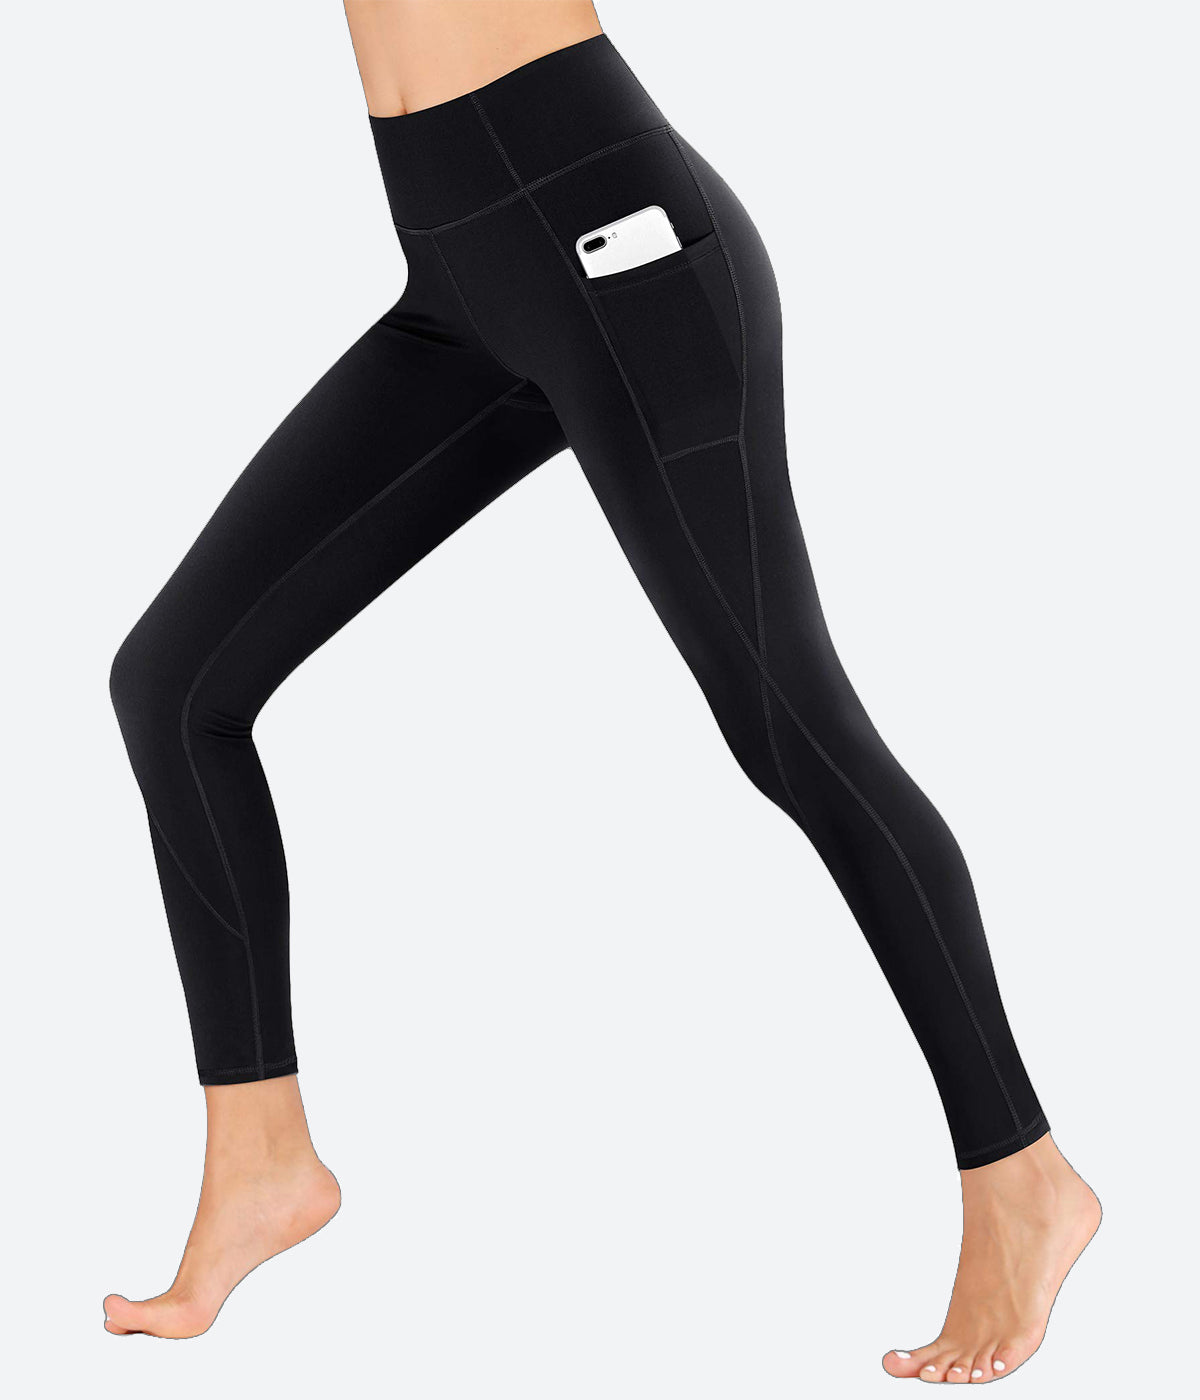 Thick High Waist Yoga Pants With Pockets, Tummy Control Workout Running Yoga  Leggings For Women#d921204